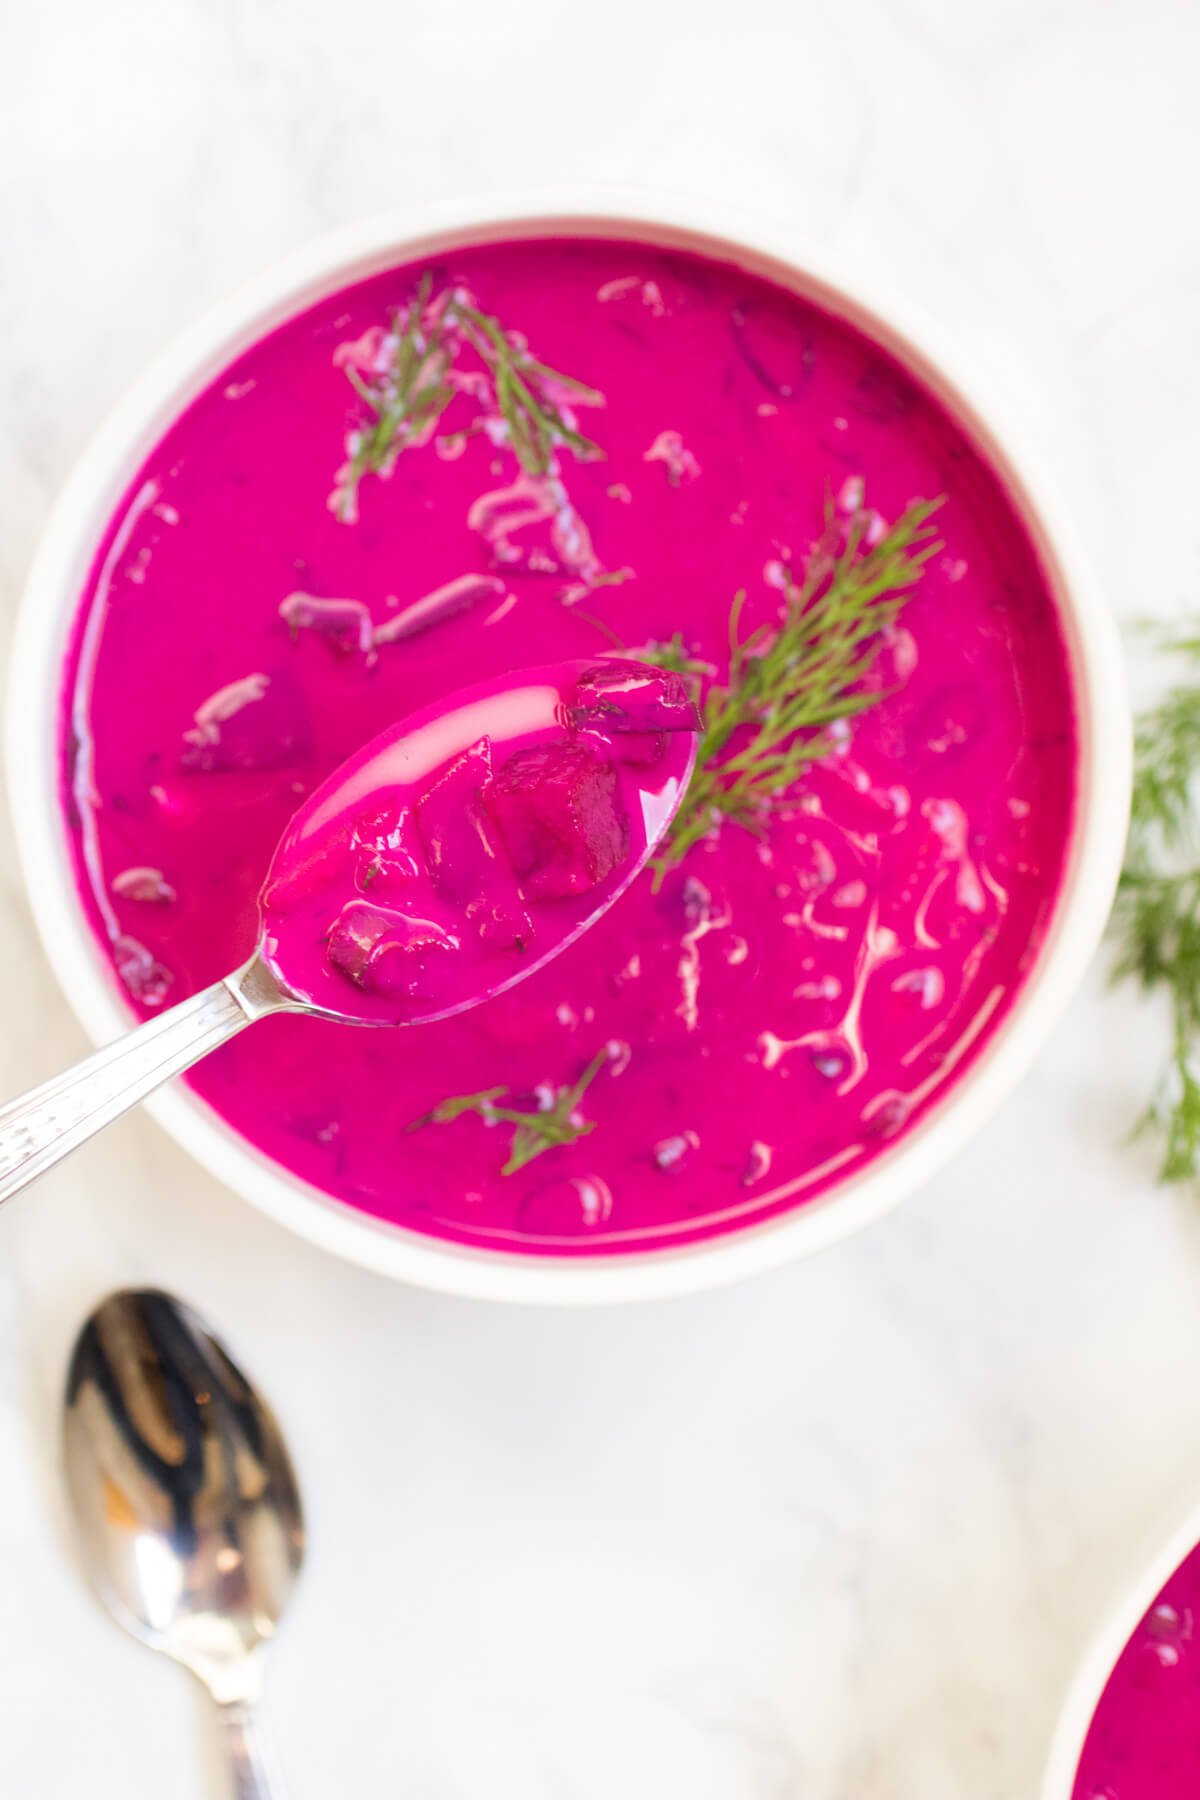 Light and refreshing this creamy chilled beet soup is a real summertime treat! Vegetarian, Healthy, Seasonal |Abraskitchen.com